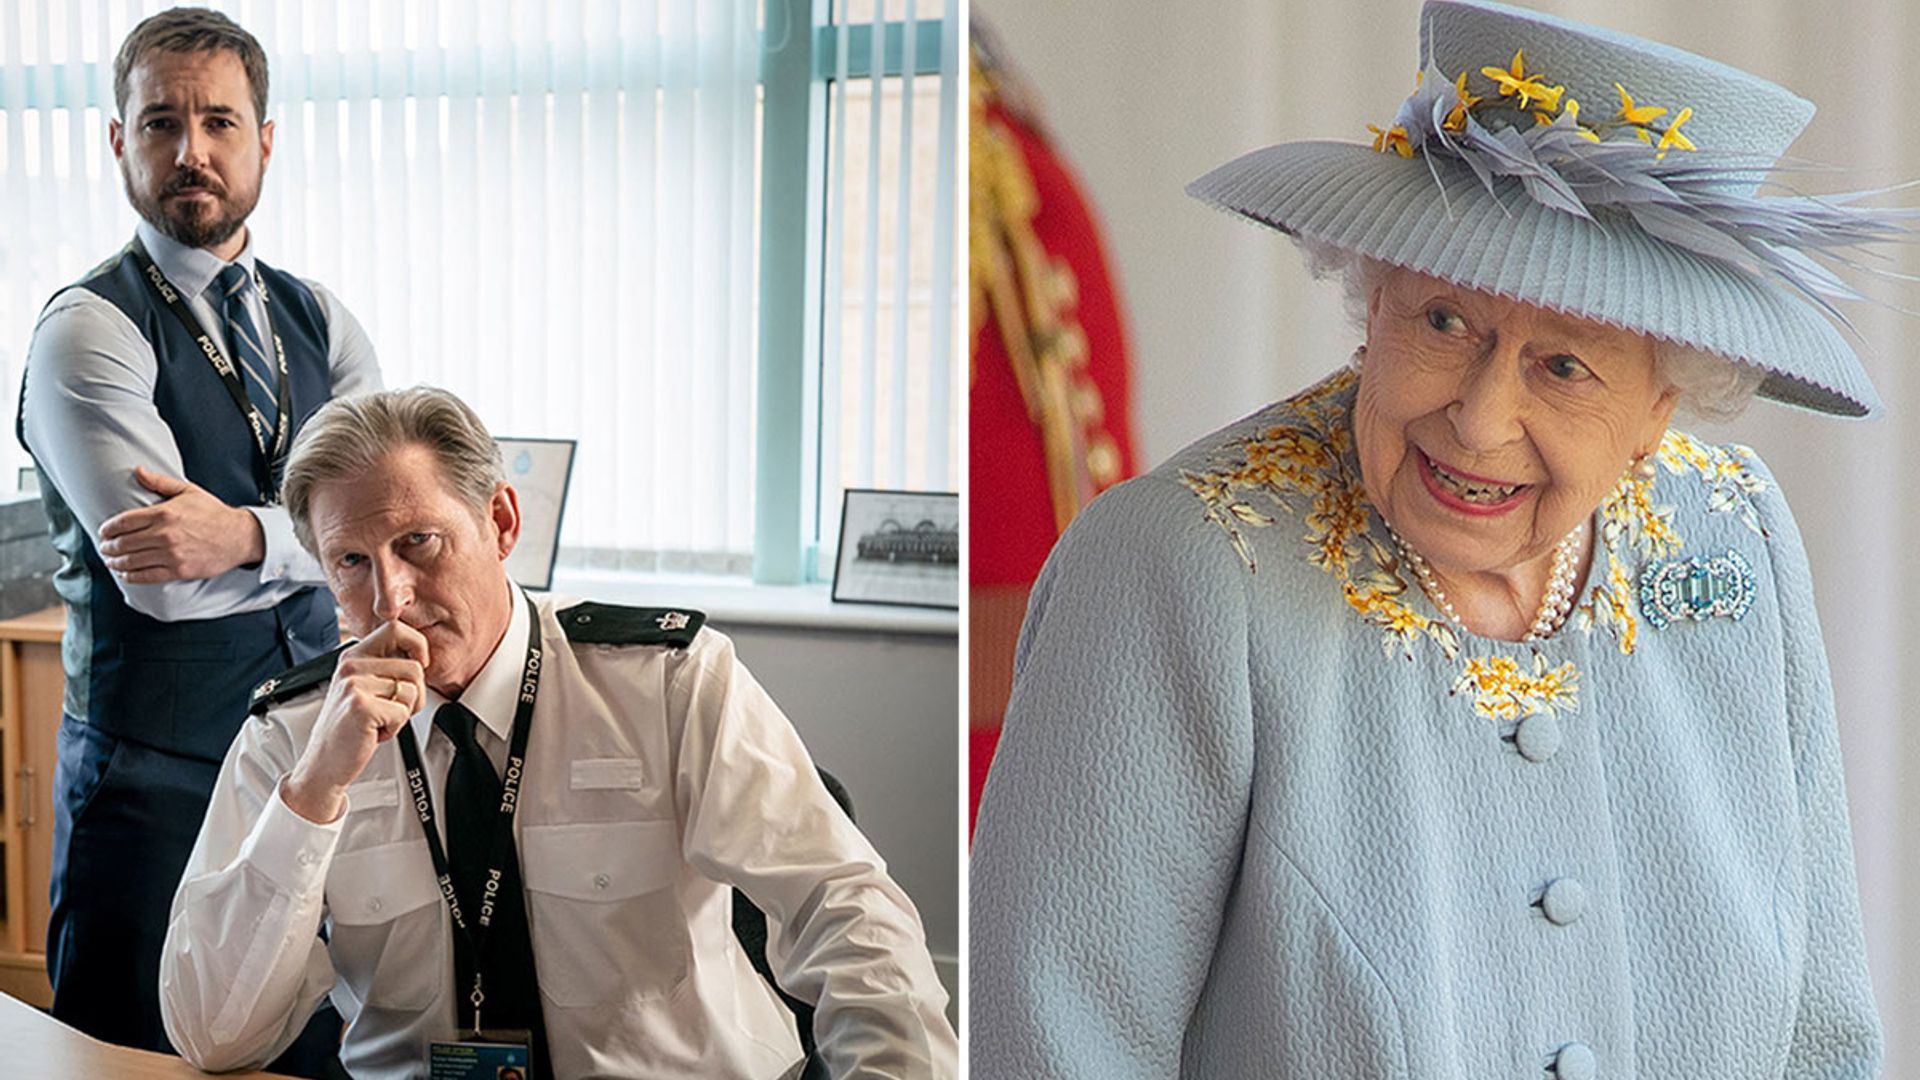 Line of Duty's Jed Mercurio responds to the Queen being 'fan' of BBC police drama